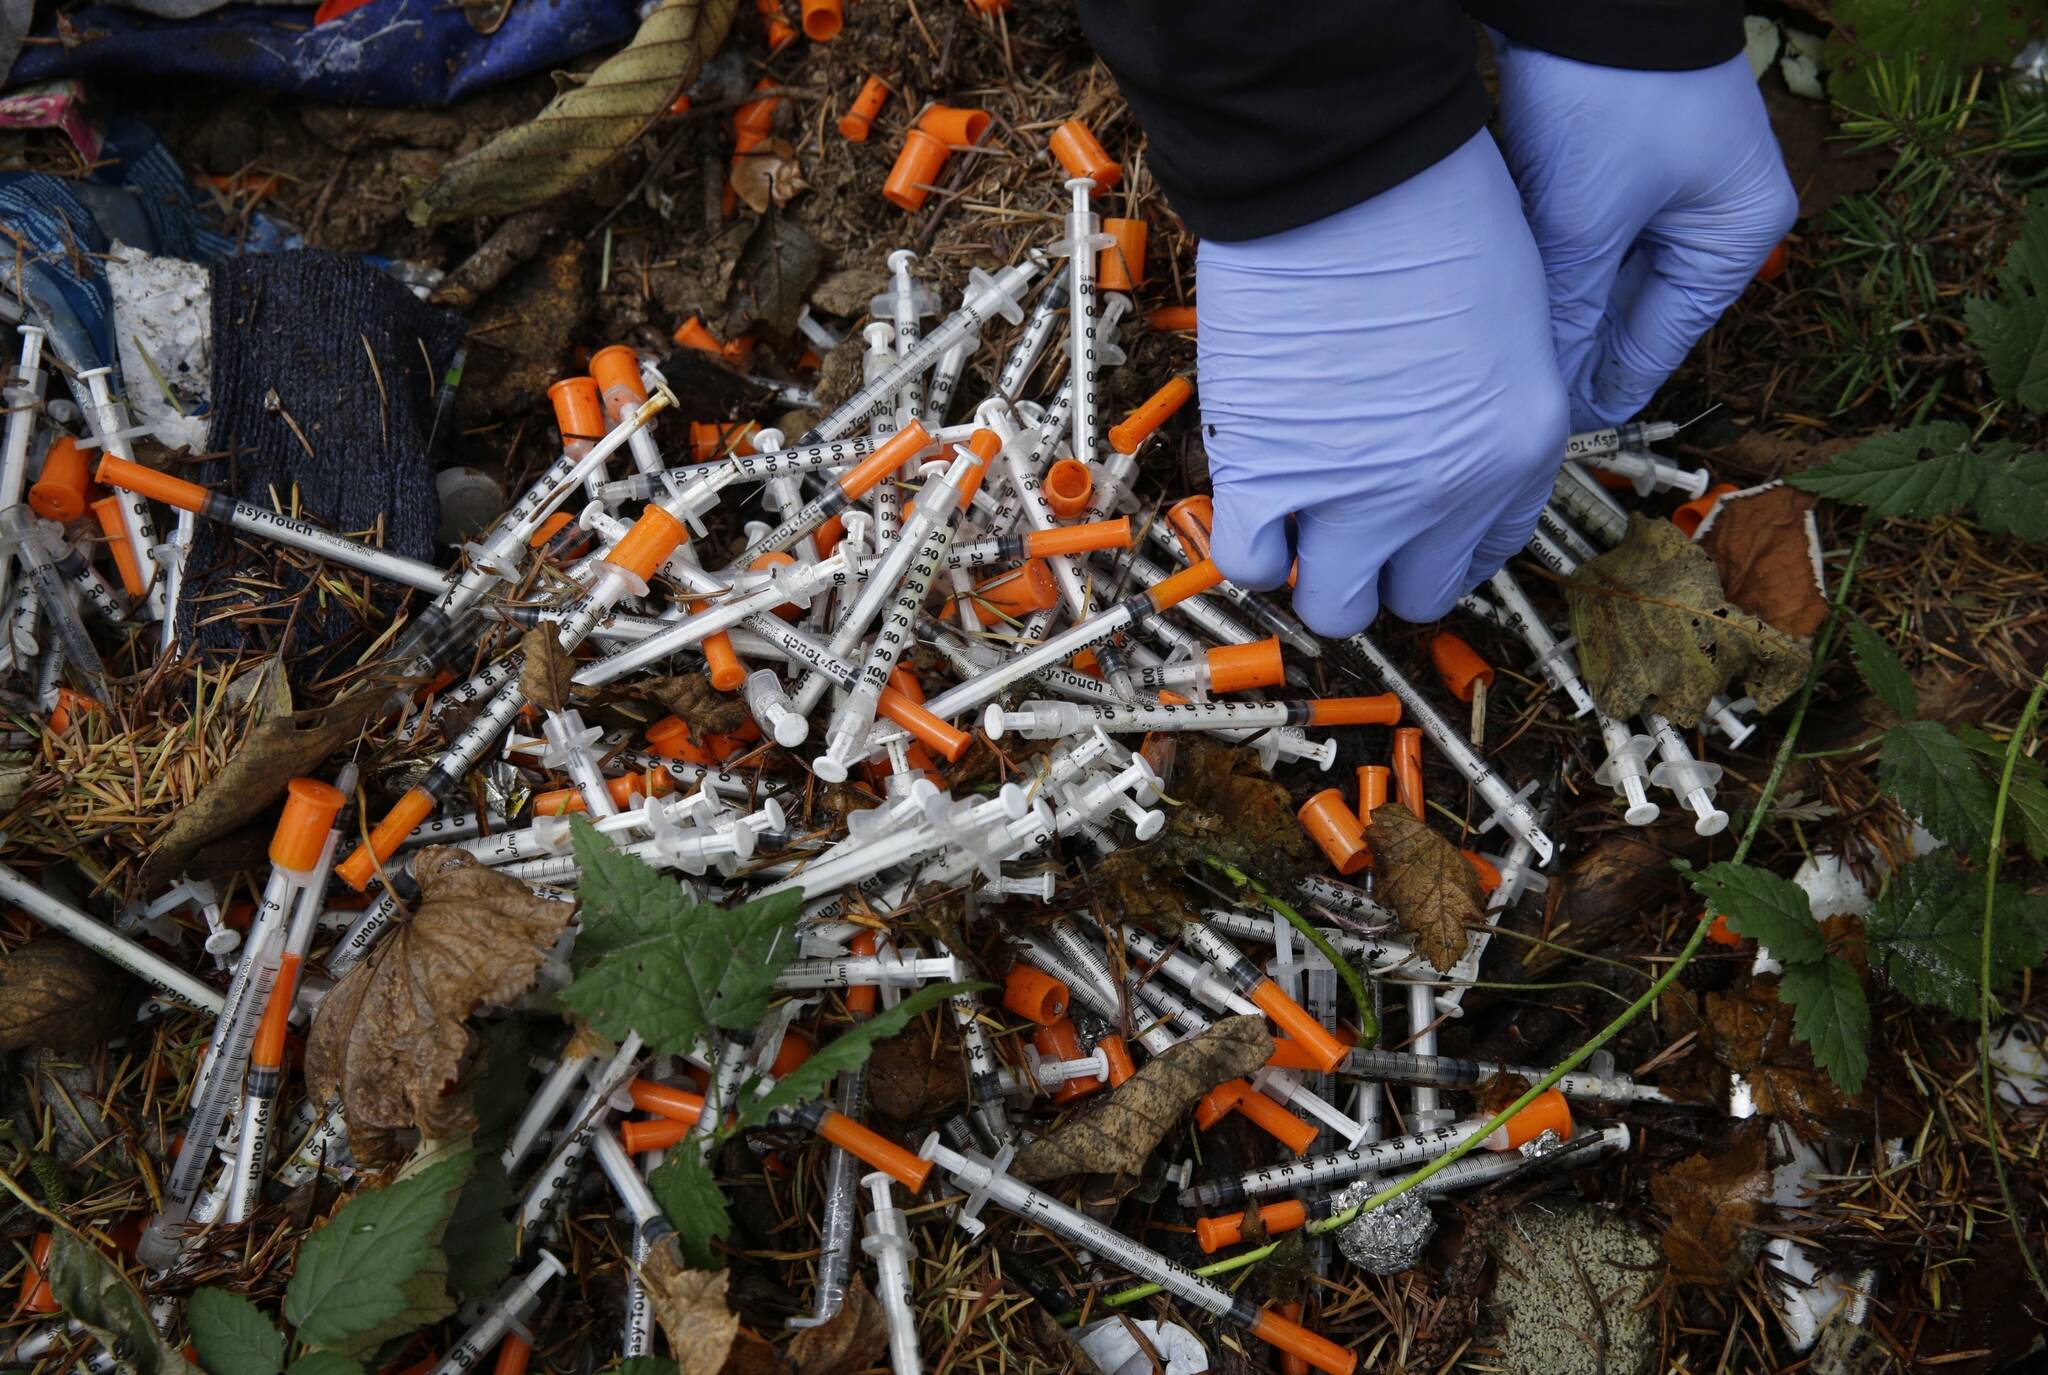 A volunteer cleans up needles used for drug injection that were found at a homeless encampment in Everett on Nov. 8, 2017. A temporary law that makes possession of small amounts of drugs a misdemeanor expires on July 1, so if lawmakers fail to pass a bill, Washington would become the second state — after neighboring Oregon — to decriminalize drug possession. Lawmakers said Tuesday they were increasingly optimistic a compromise will be reached to avoid those consequences. (Ted S. Warren/The Associated Press, file)